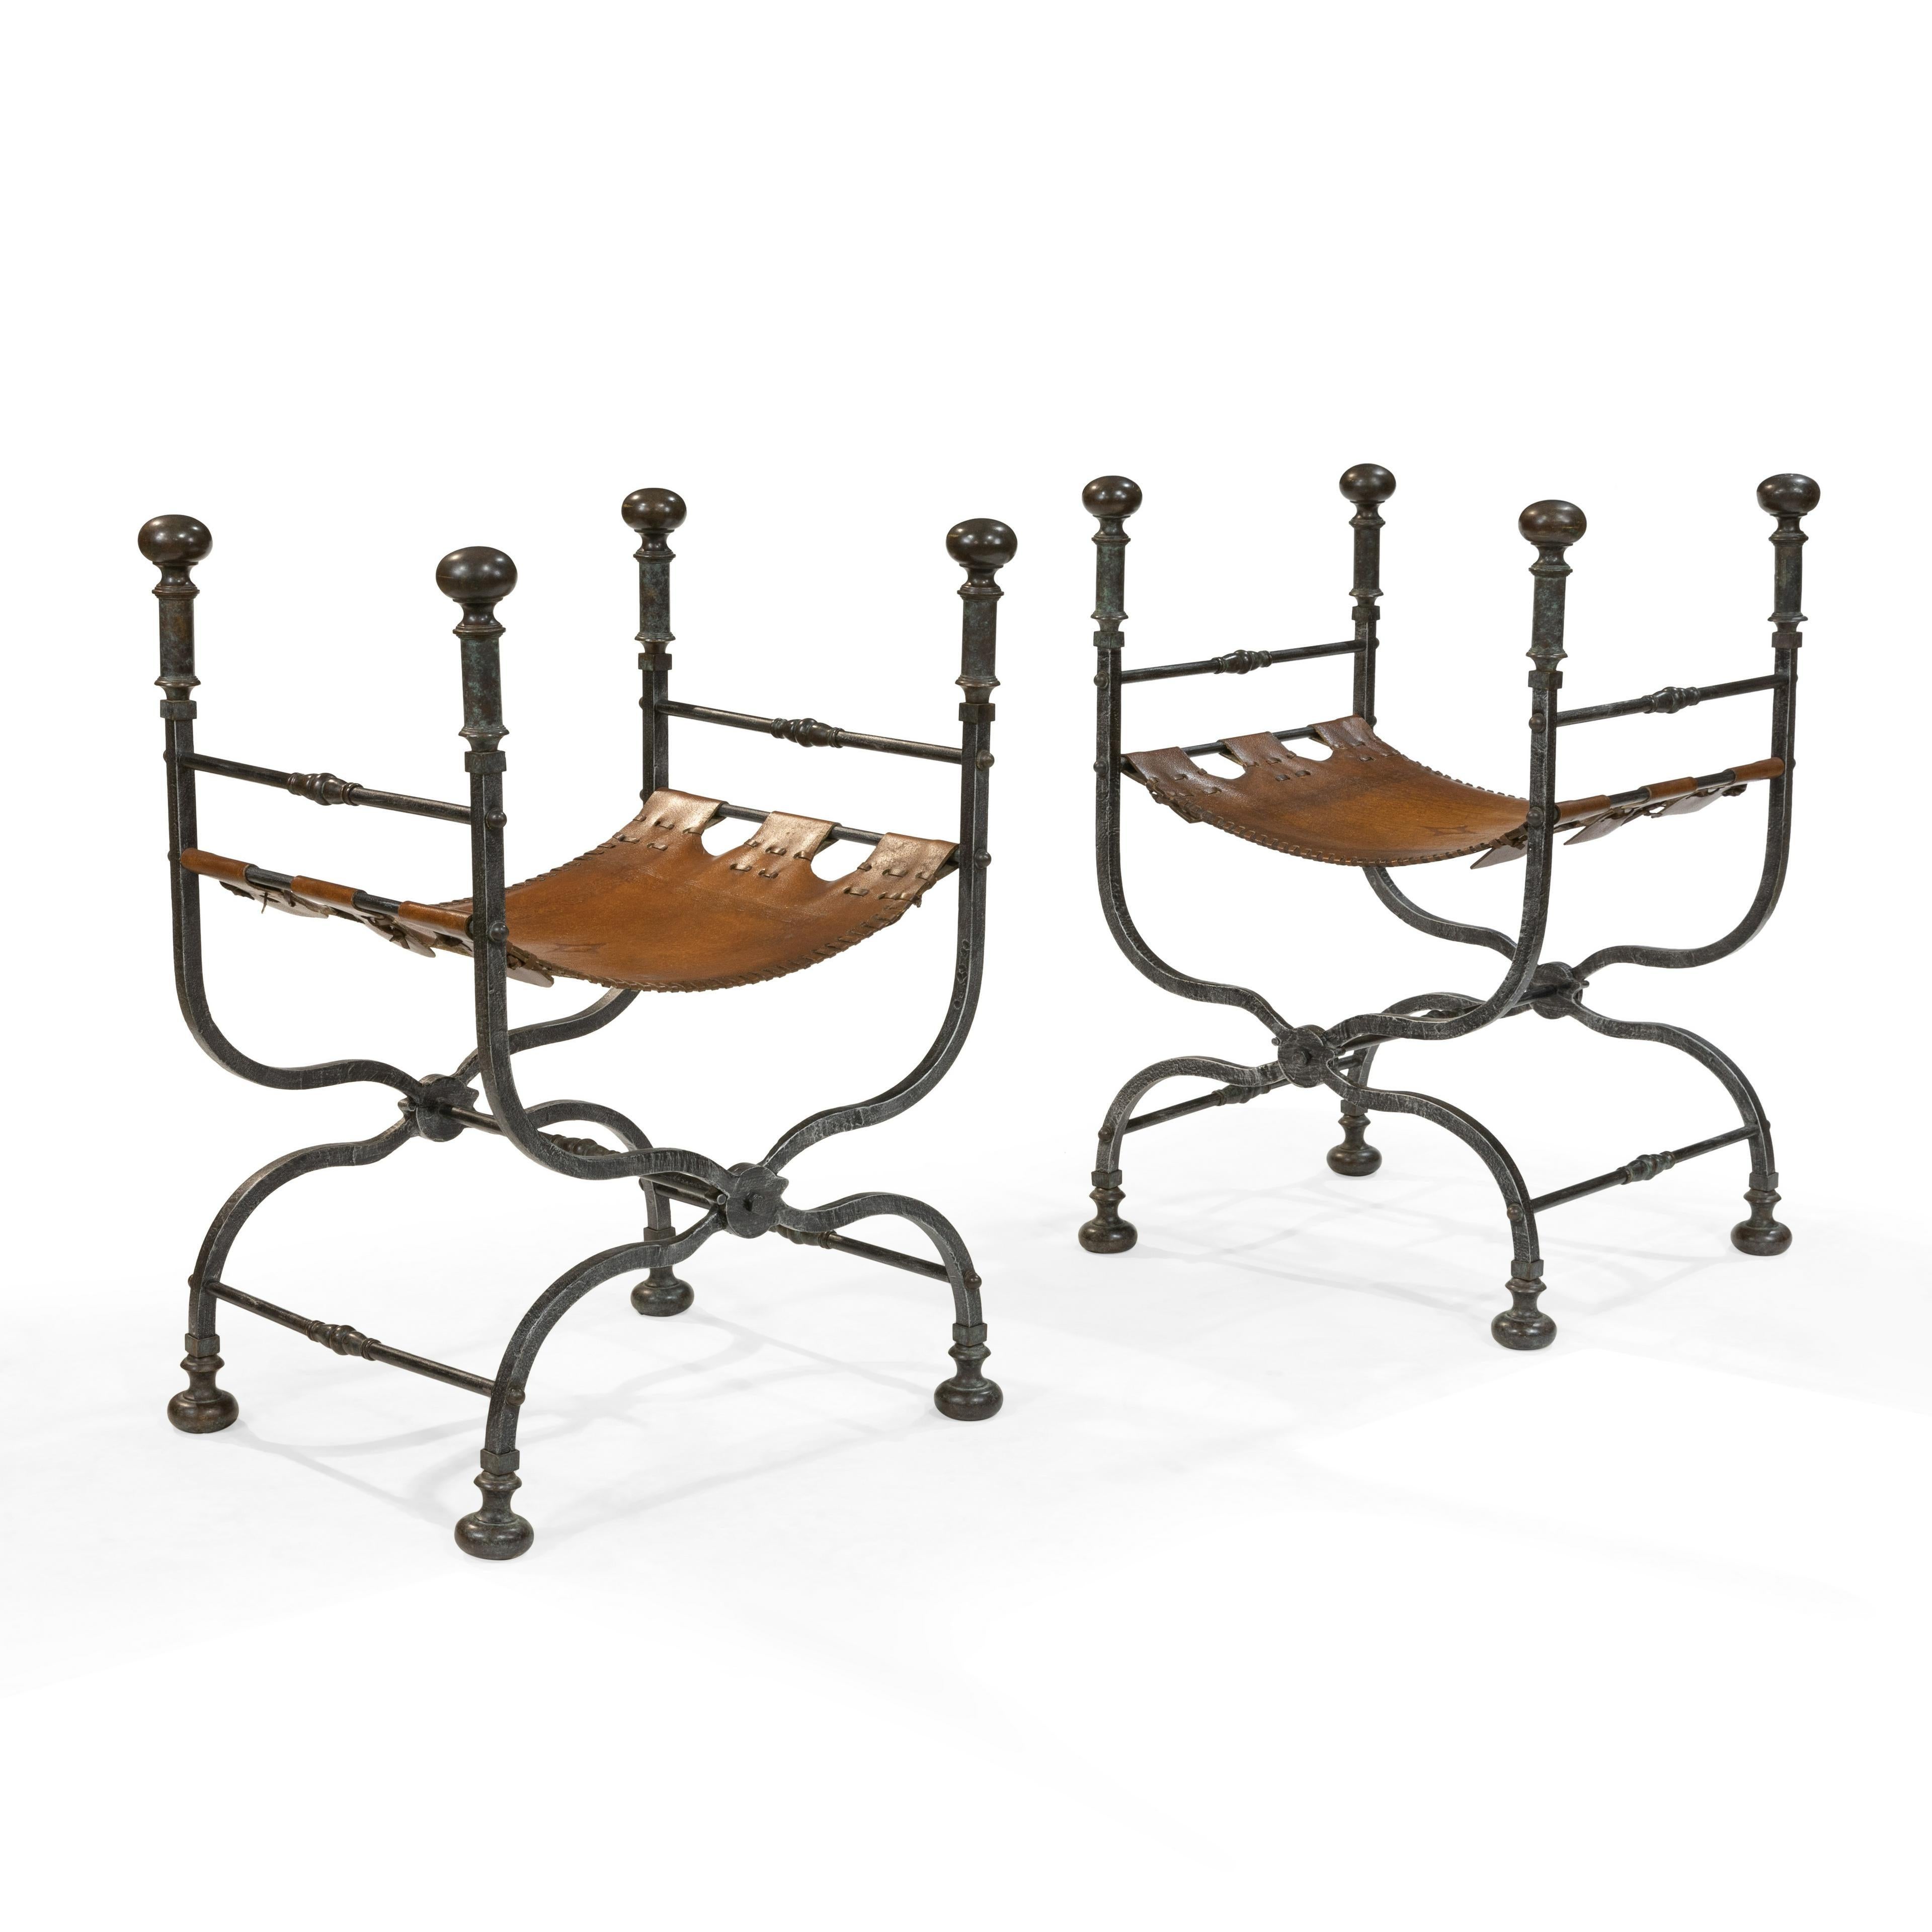 Pair of iron and leather Savonarola chairs / benches folding. A fine antique pair of Savonarola chairs in their original weaved seats. The strong sturdy metal frames fold and are certain to support any sitting weight.
Ehh.